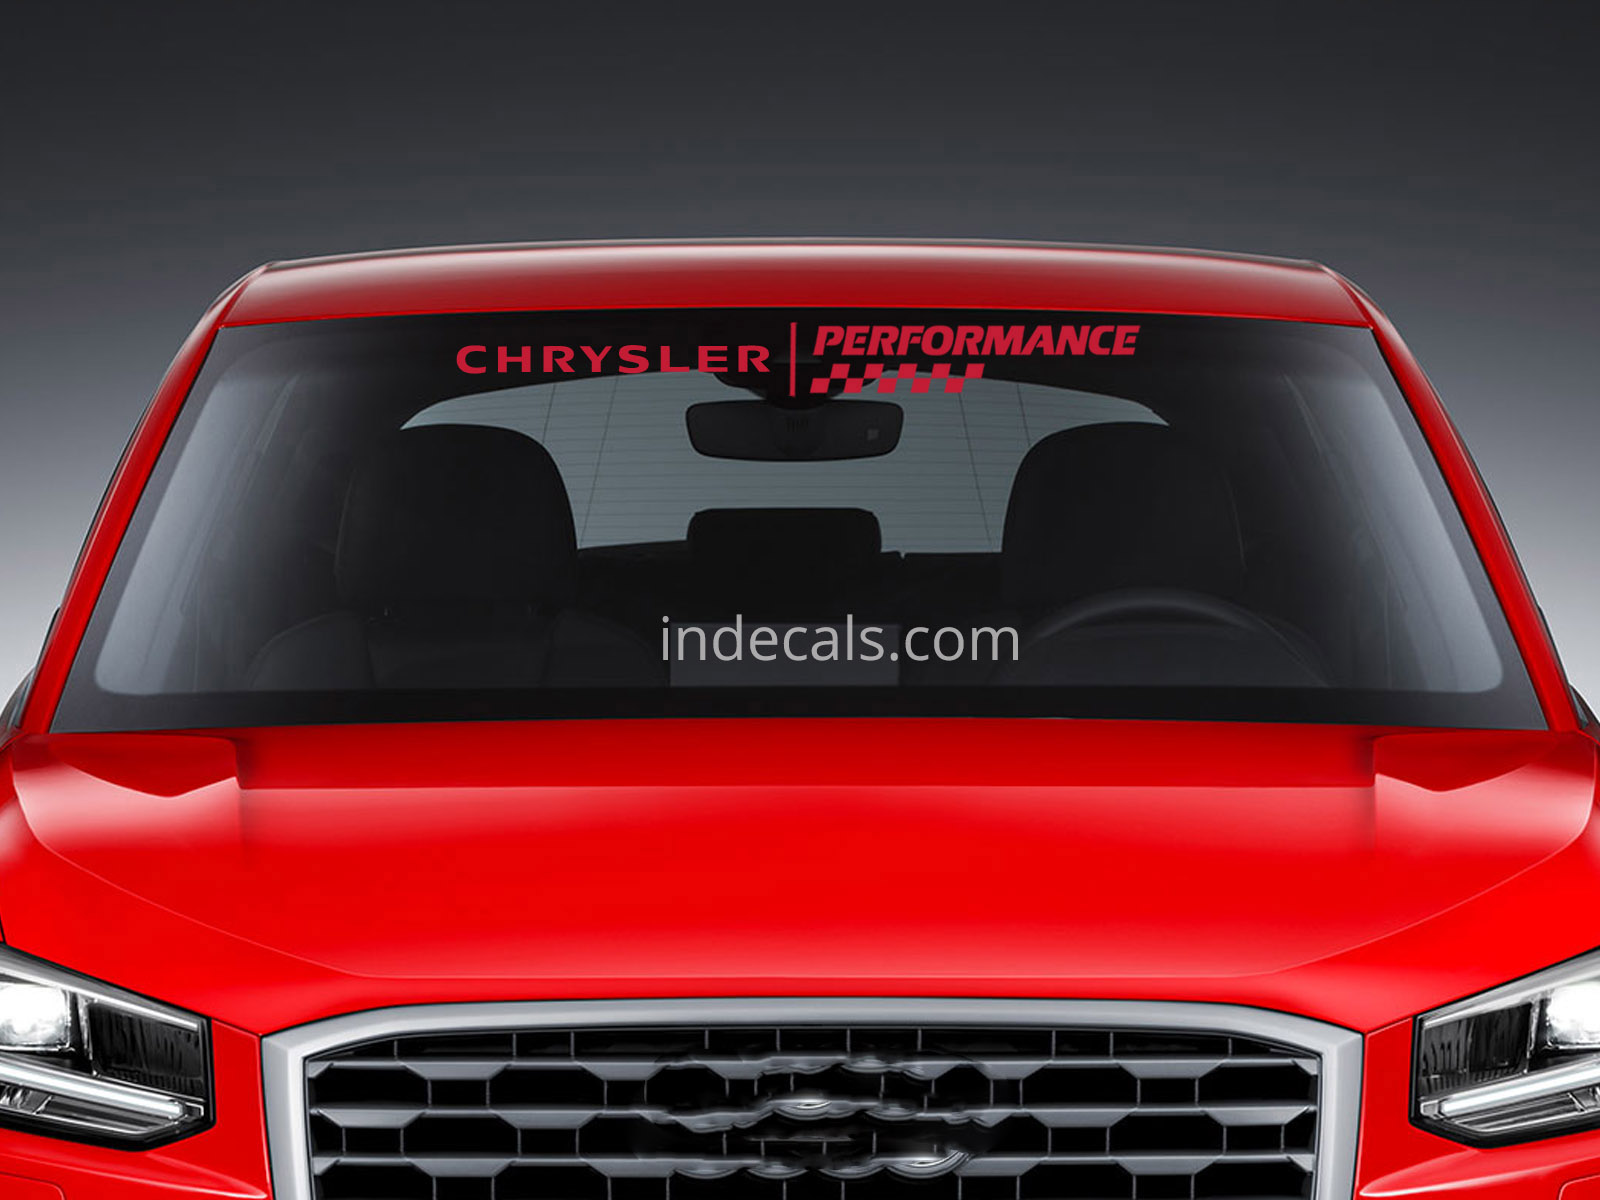 1 x Chrysler Performance Sticker for Windshield or Back Window - Red